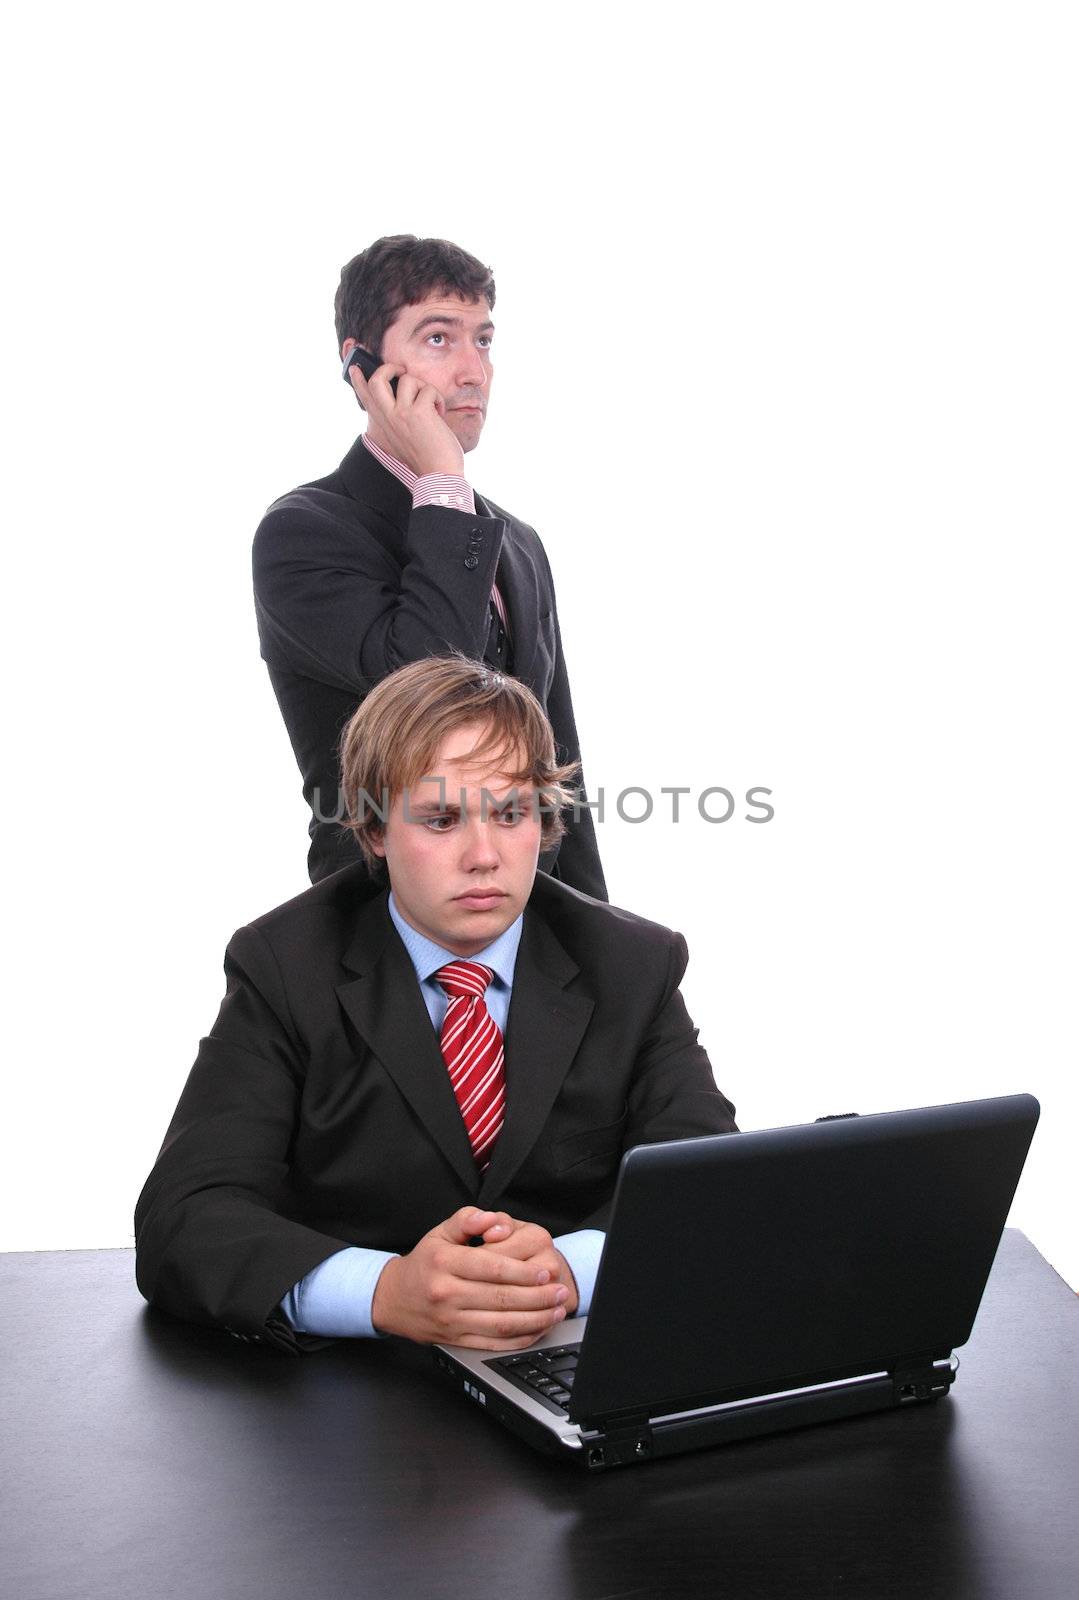 business man working with laptop over white background